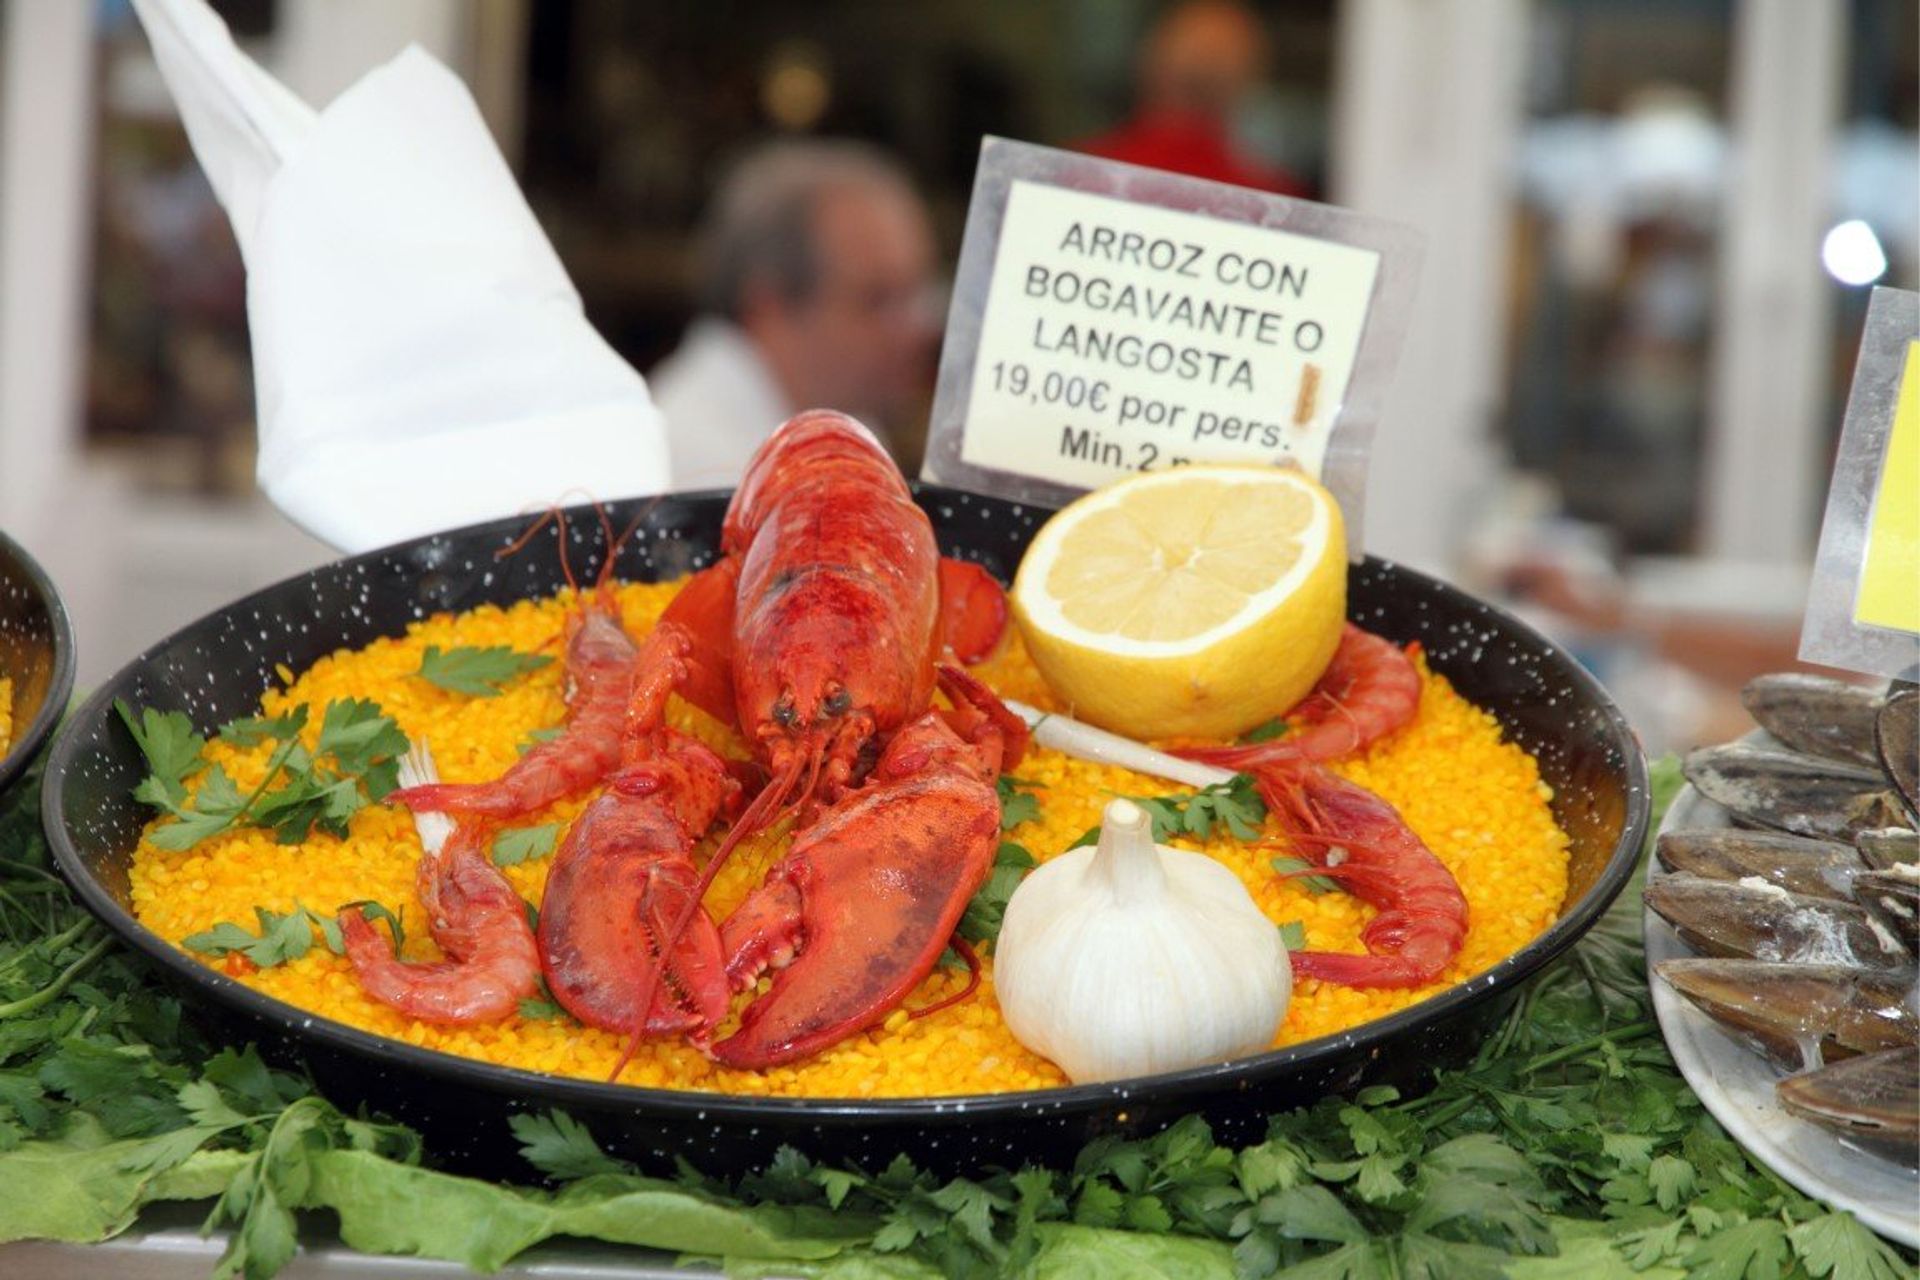 Enjoy an alfresco meal of traditional seafood paella